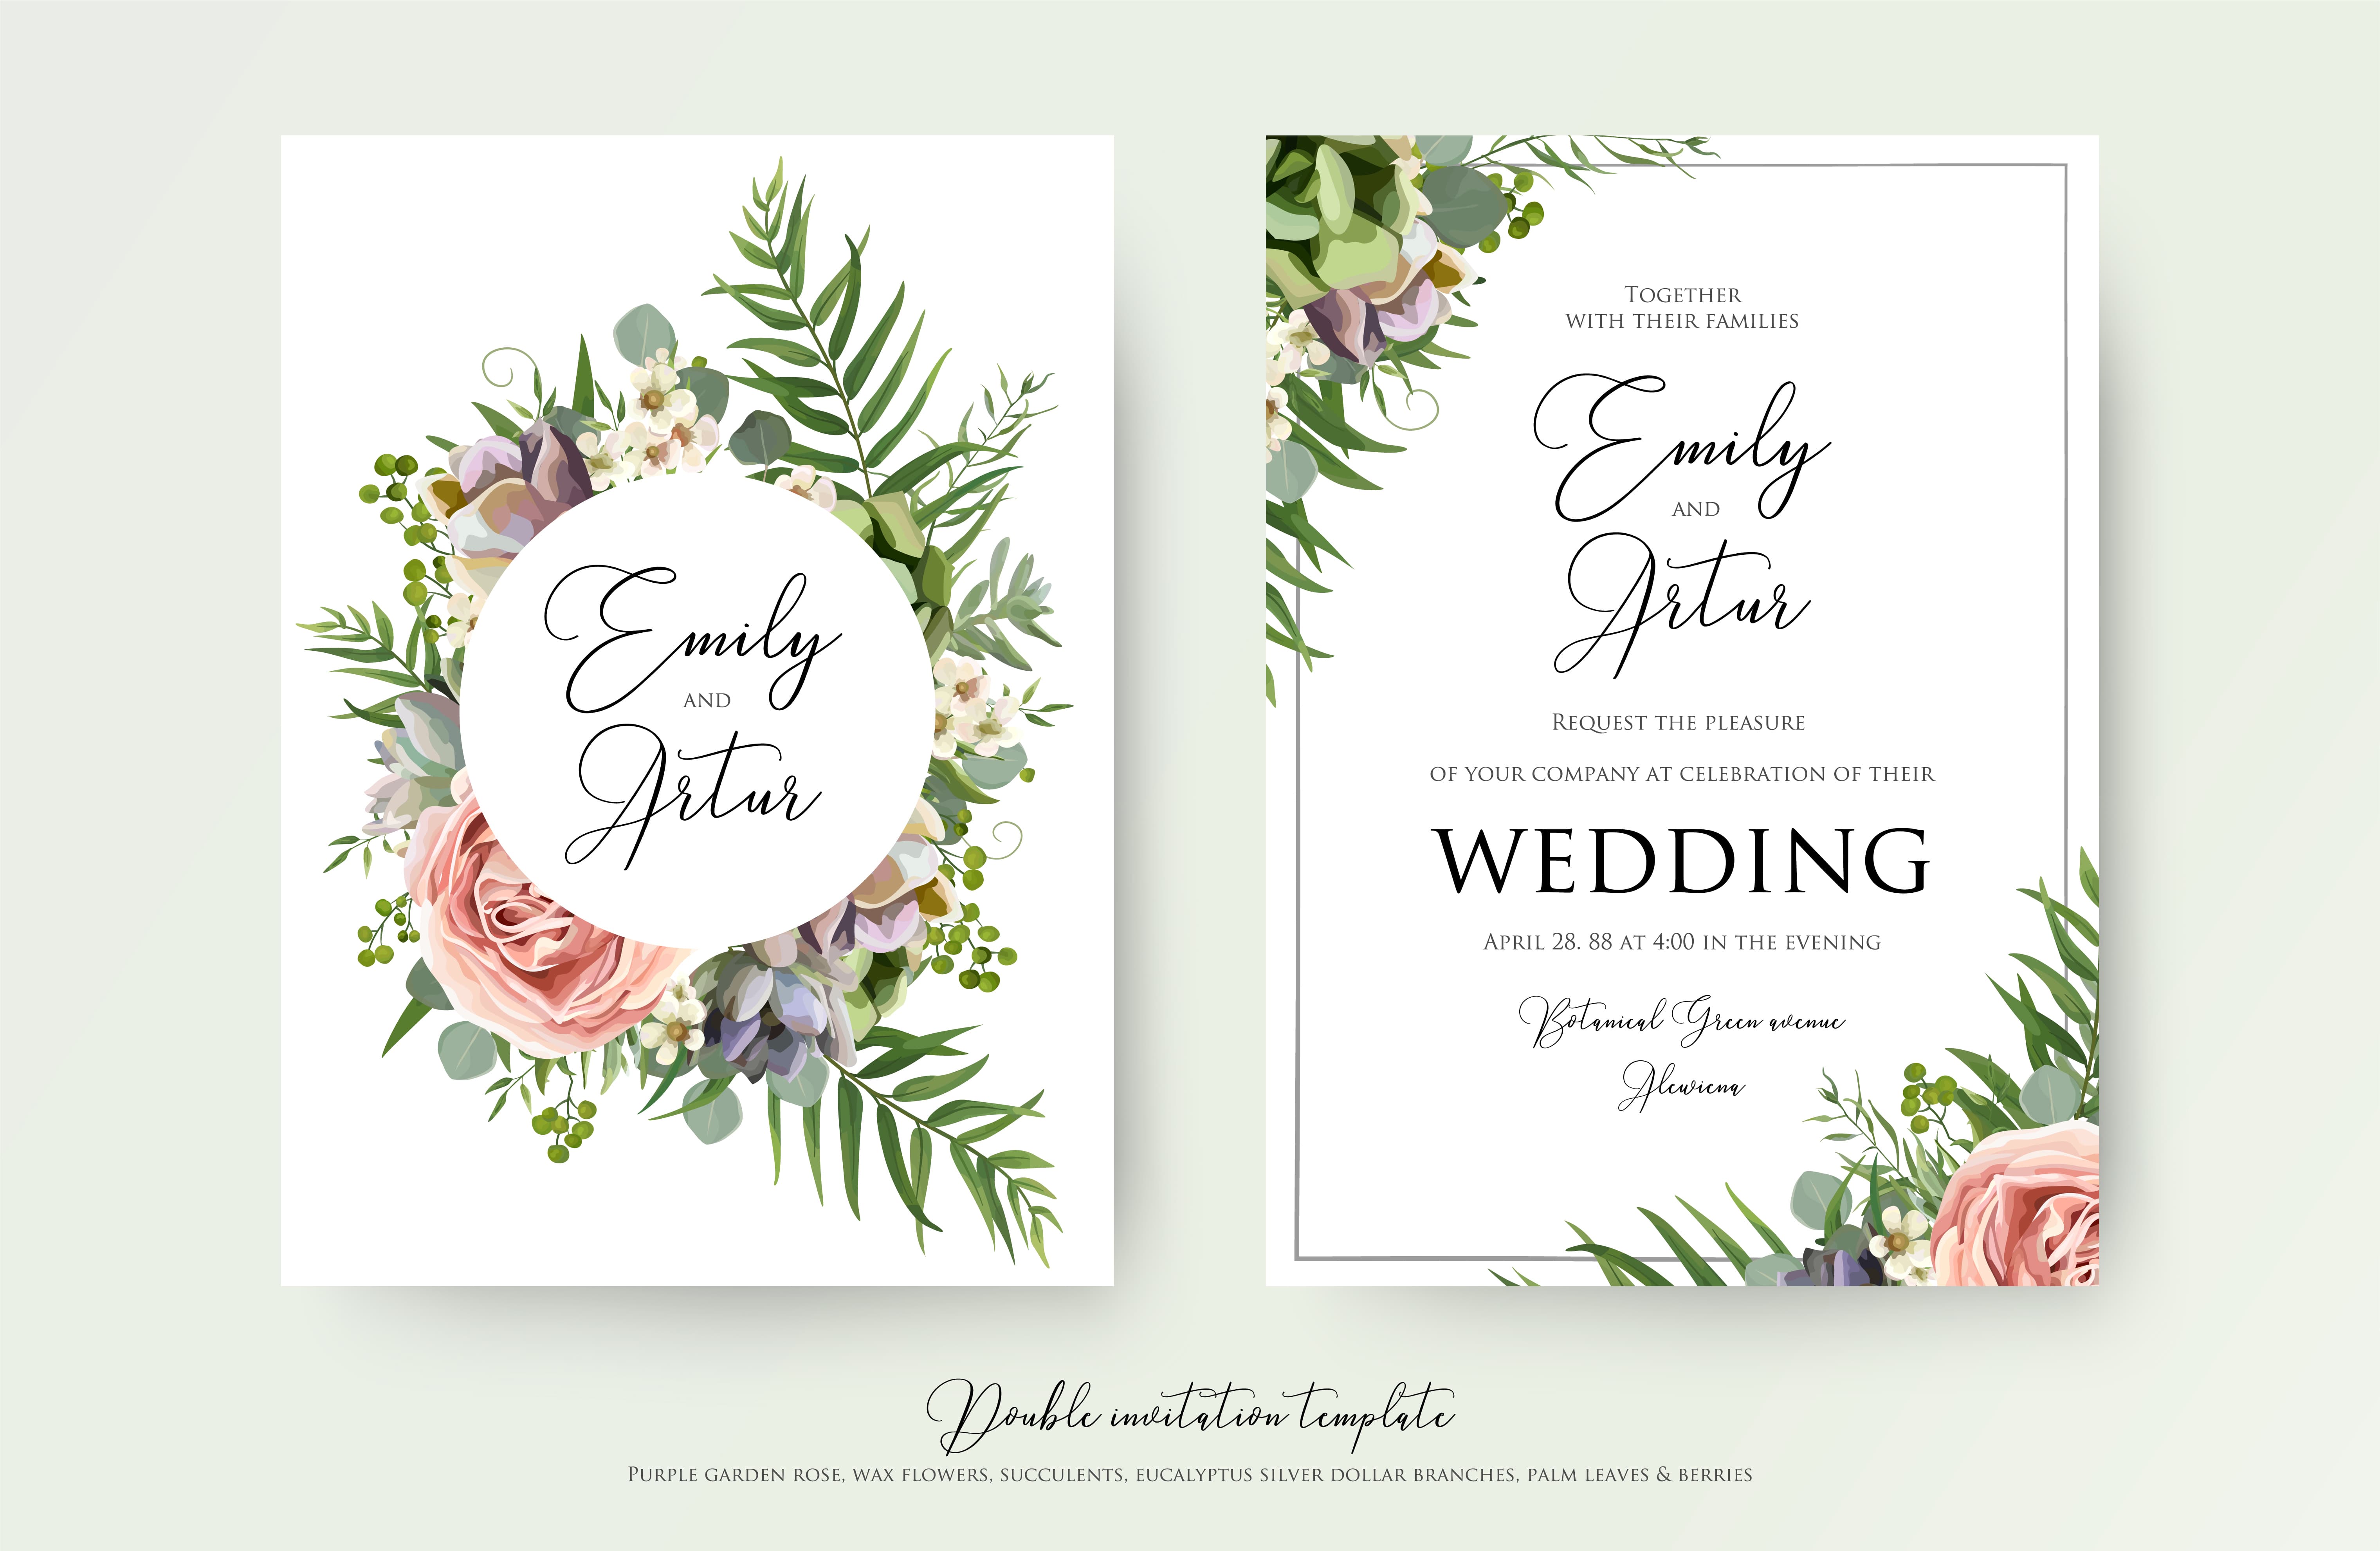 turnaround-time-for-printing-wedding-invitations-in-london